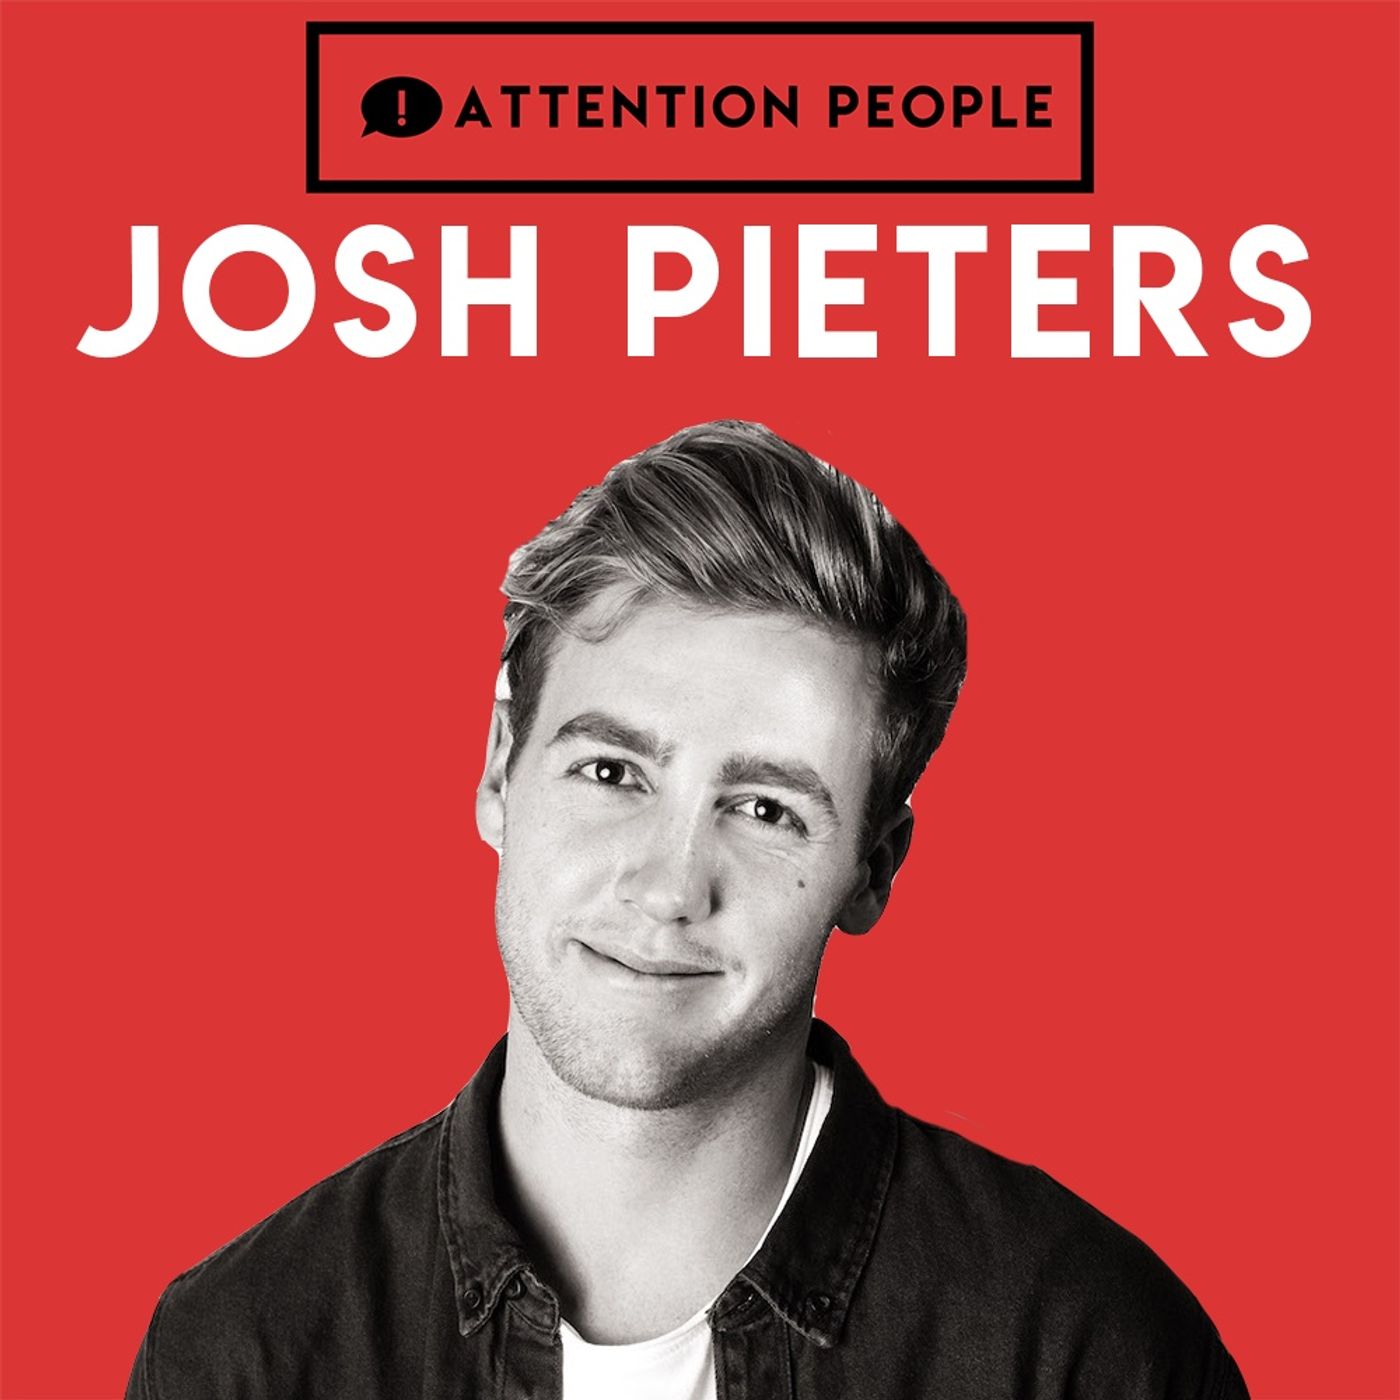 Josh Pieters - Fooling The Media, Celebrity Collabs & Stoicism